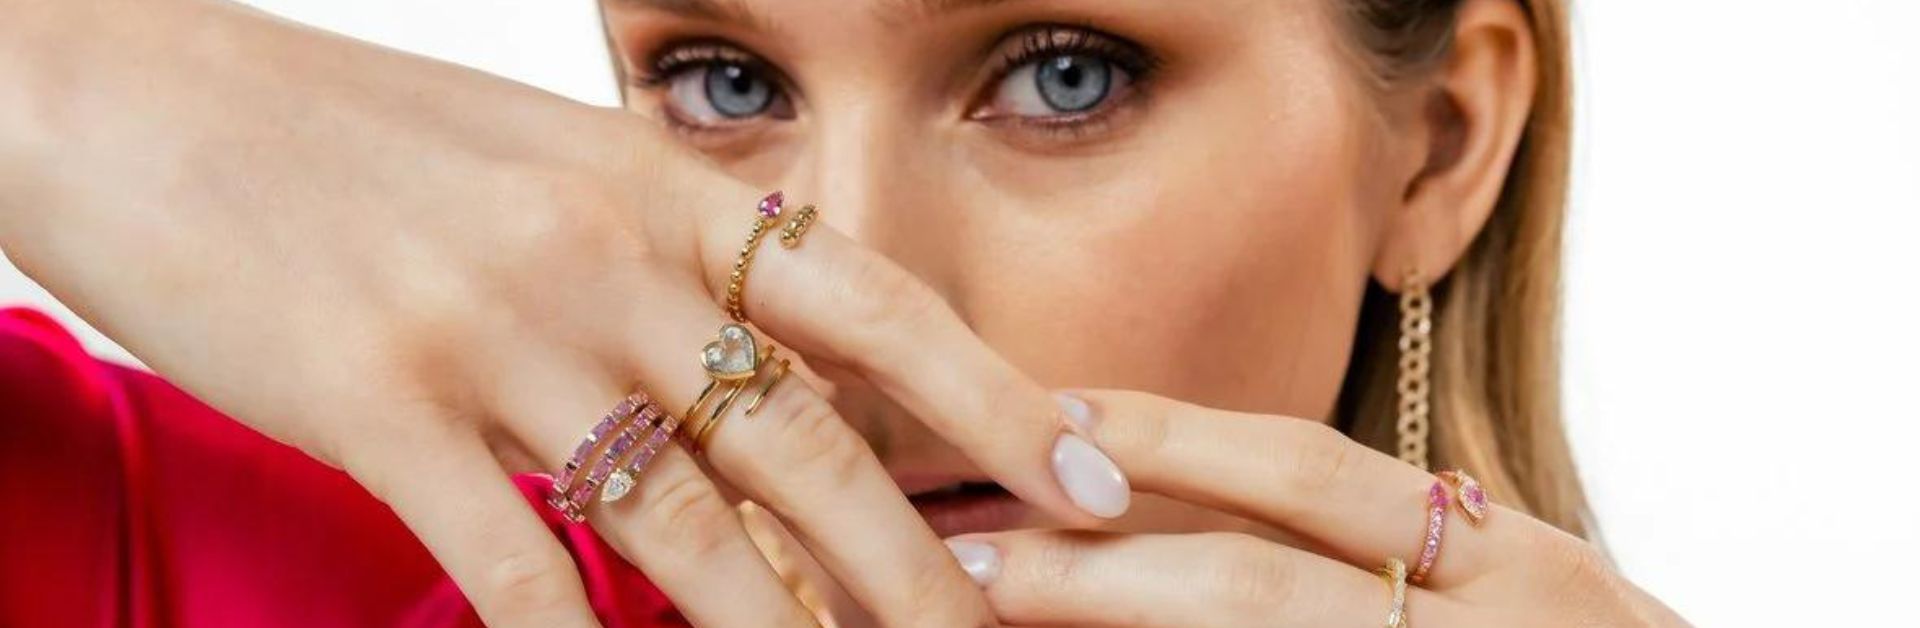 Know the Best Guide to Buying Jewelry